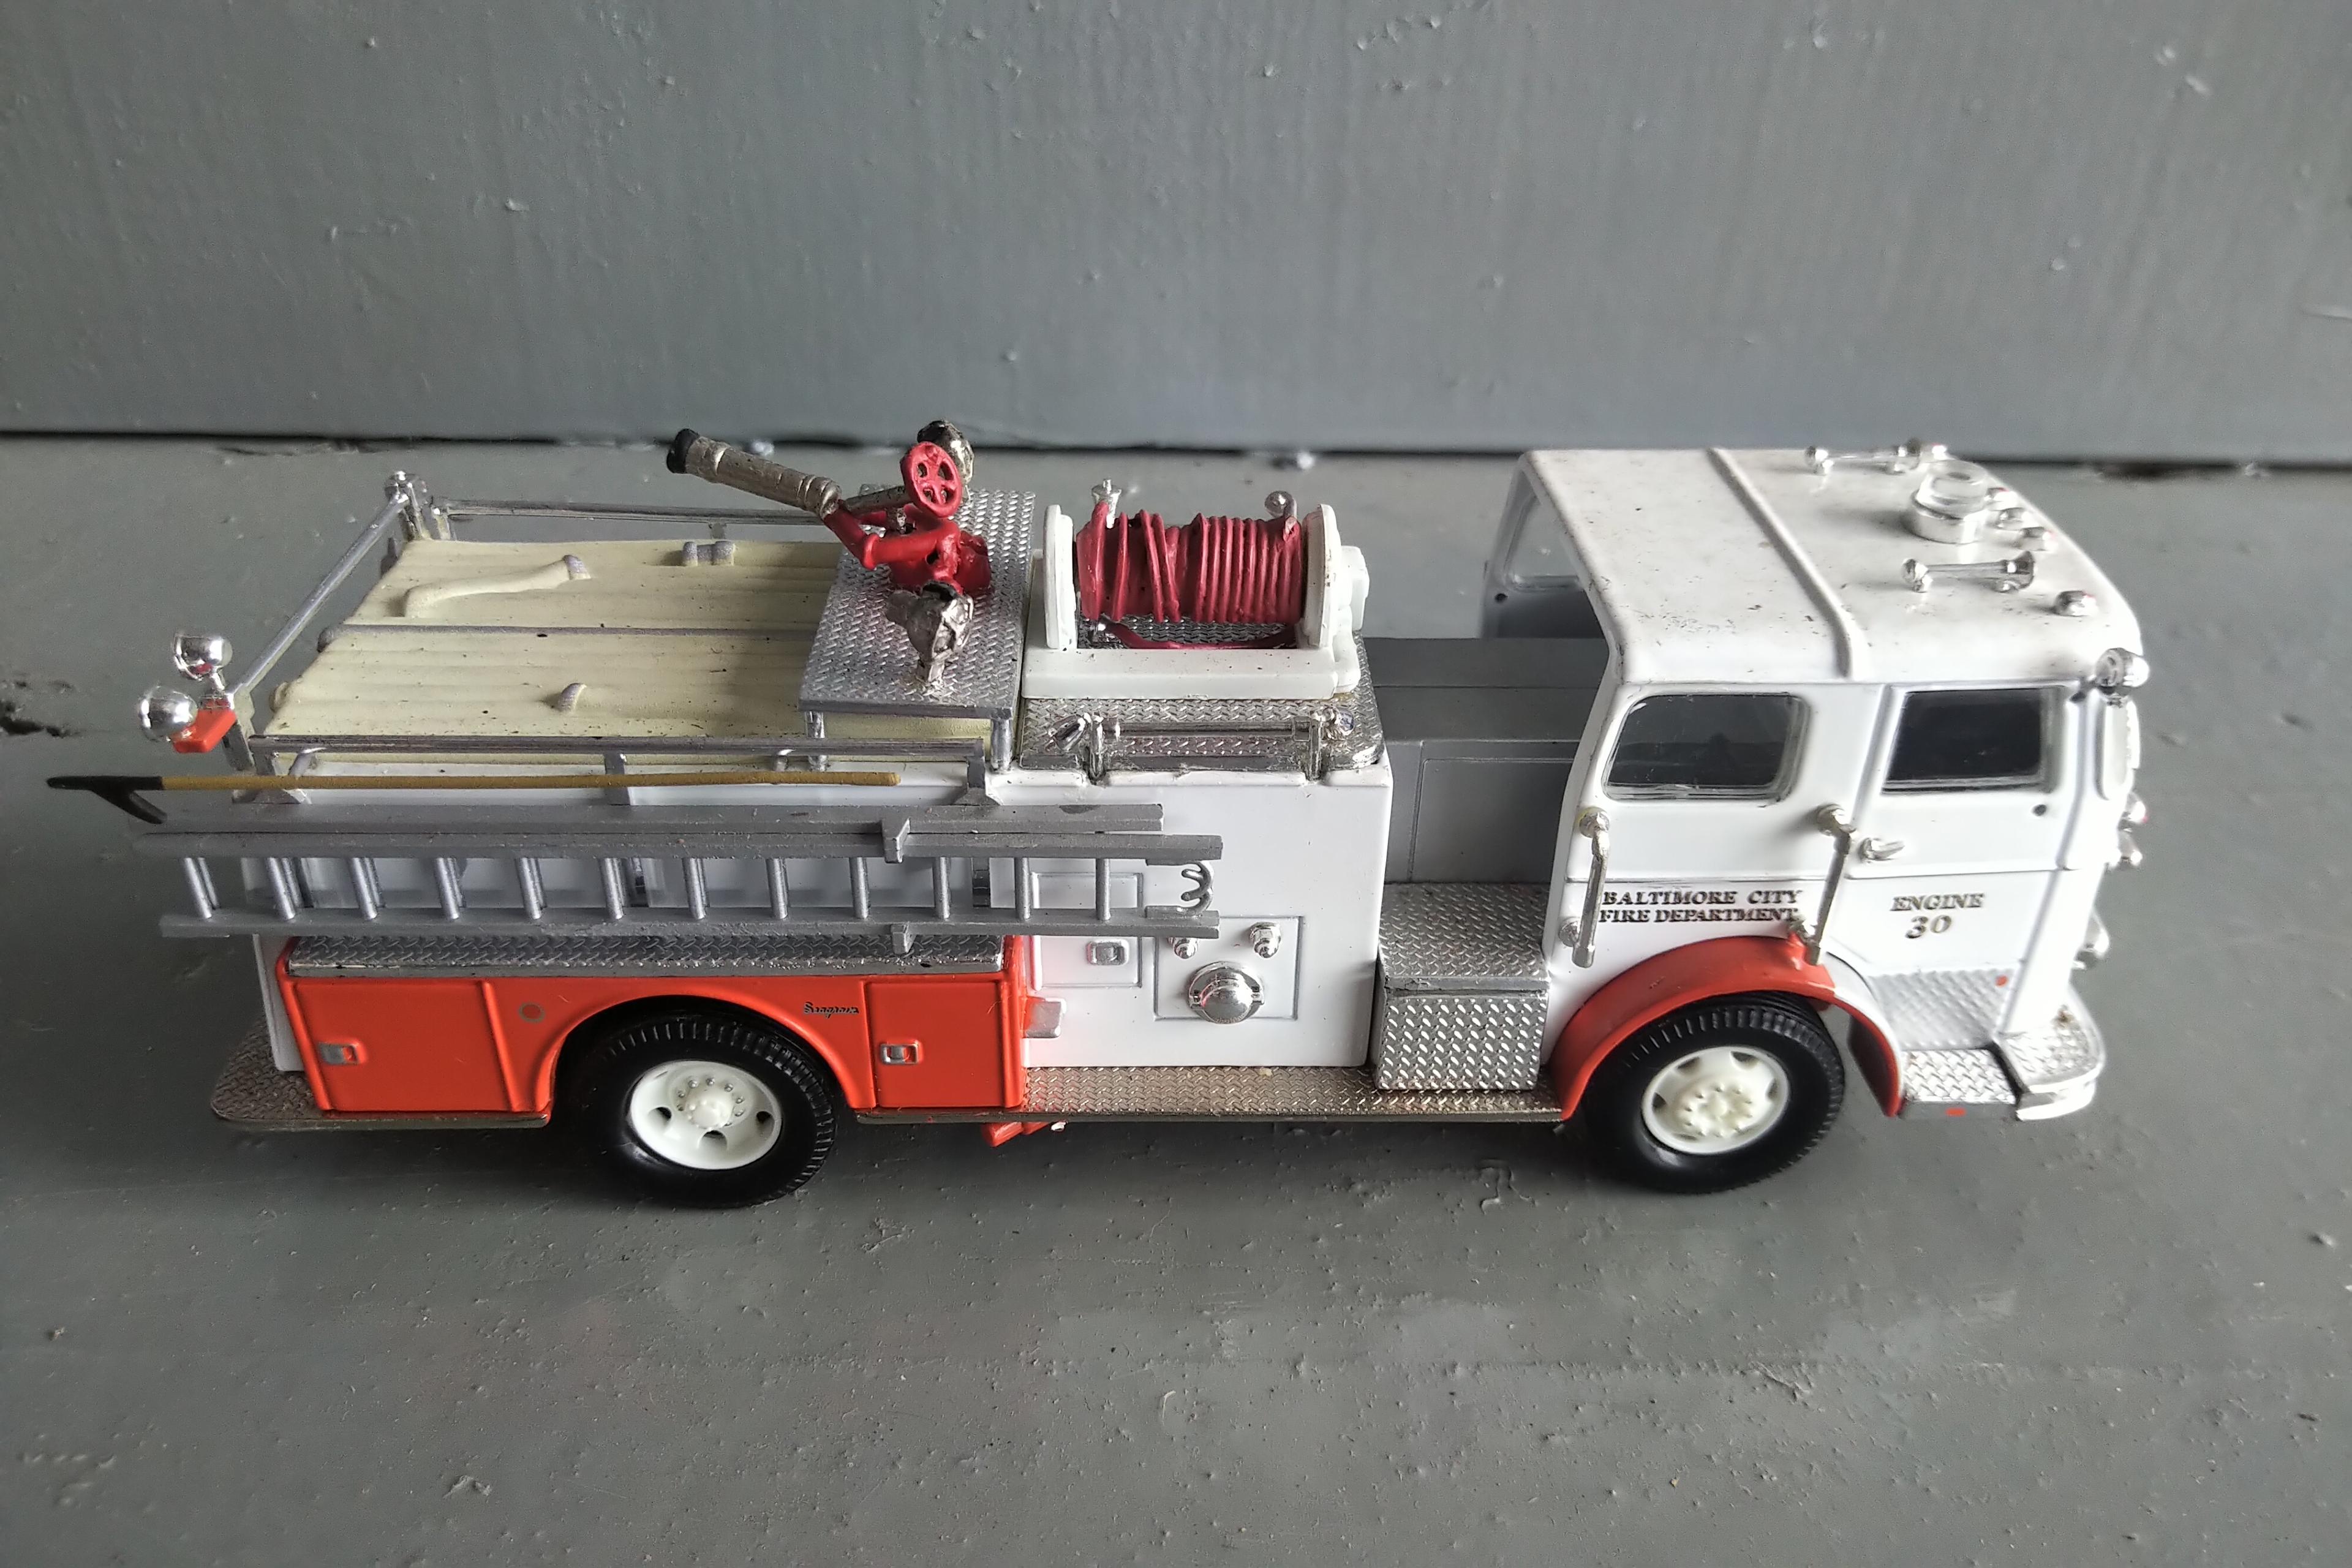 A TUBE OF 12 - 1/64 SCALE FIRE TRUCKS, A 1/64 SCALE POLICE CAR